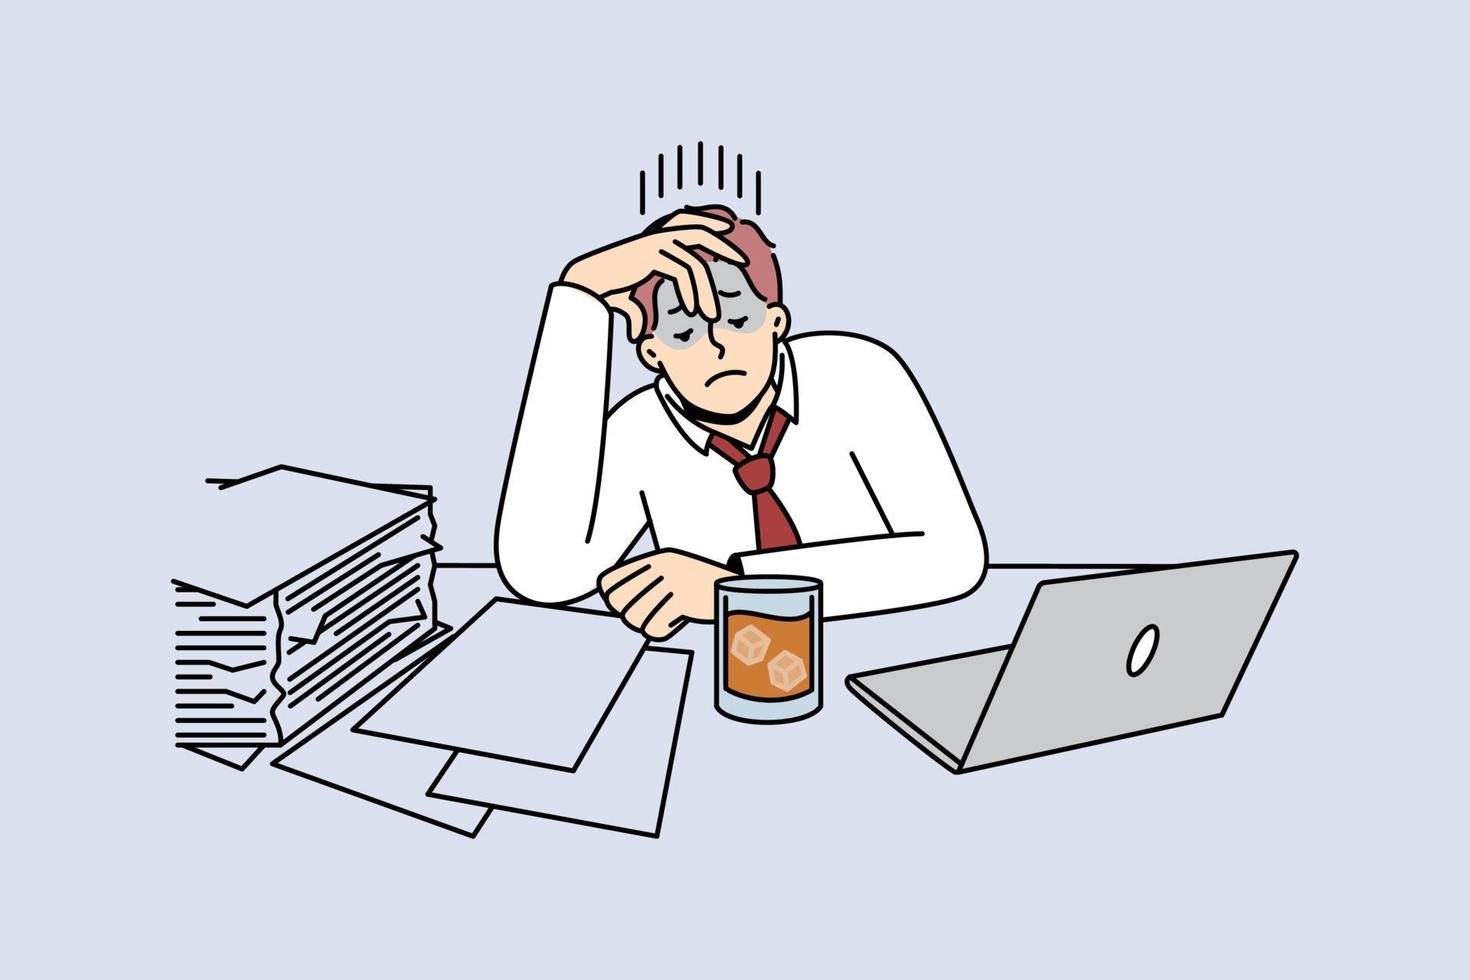 Tired businessman with glass of whiskey on table suffer from job burnout. Male journalist or editor feel stressed overwhelmed with work. Vector illustration.